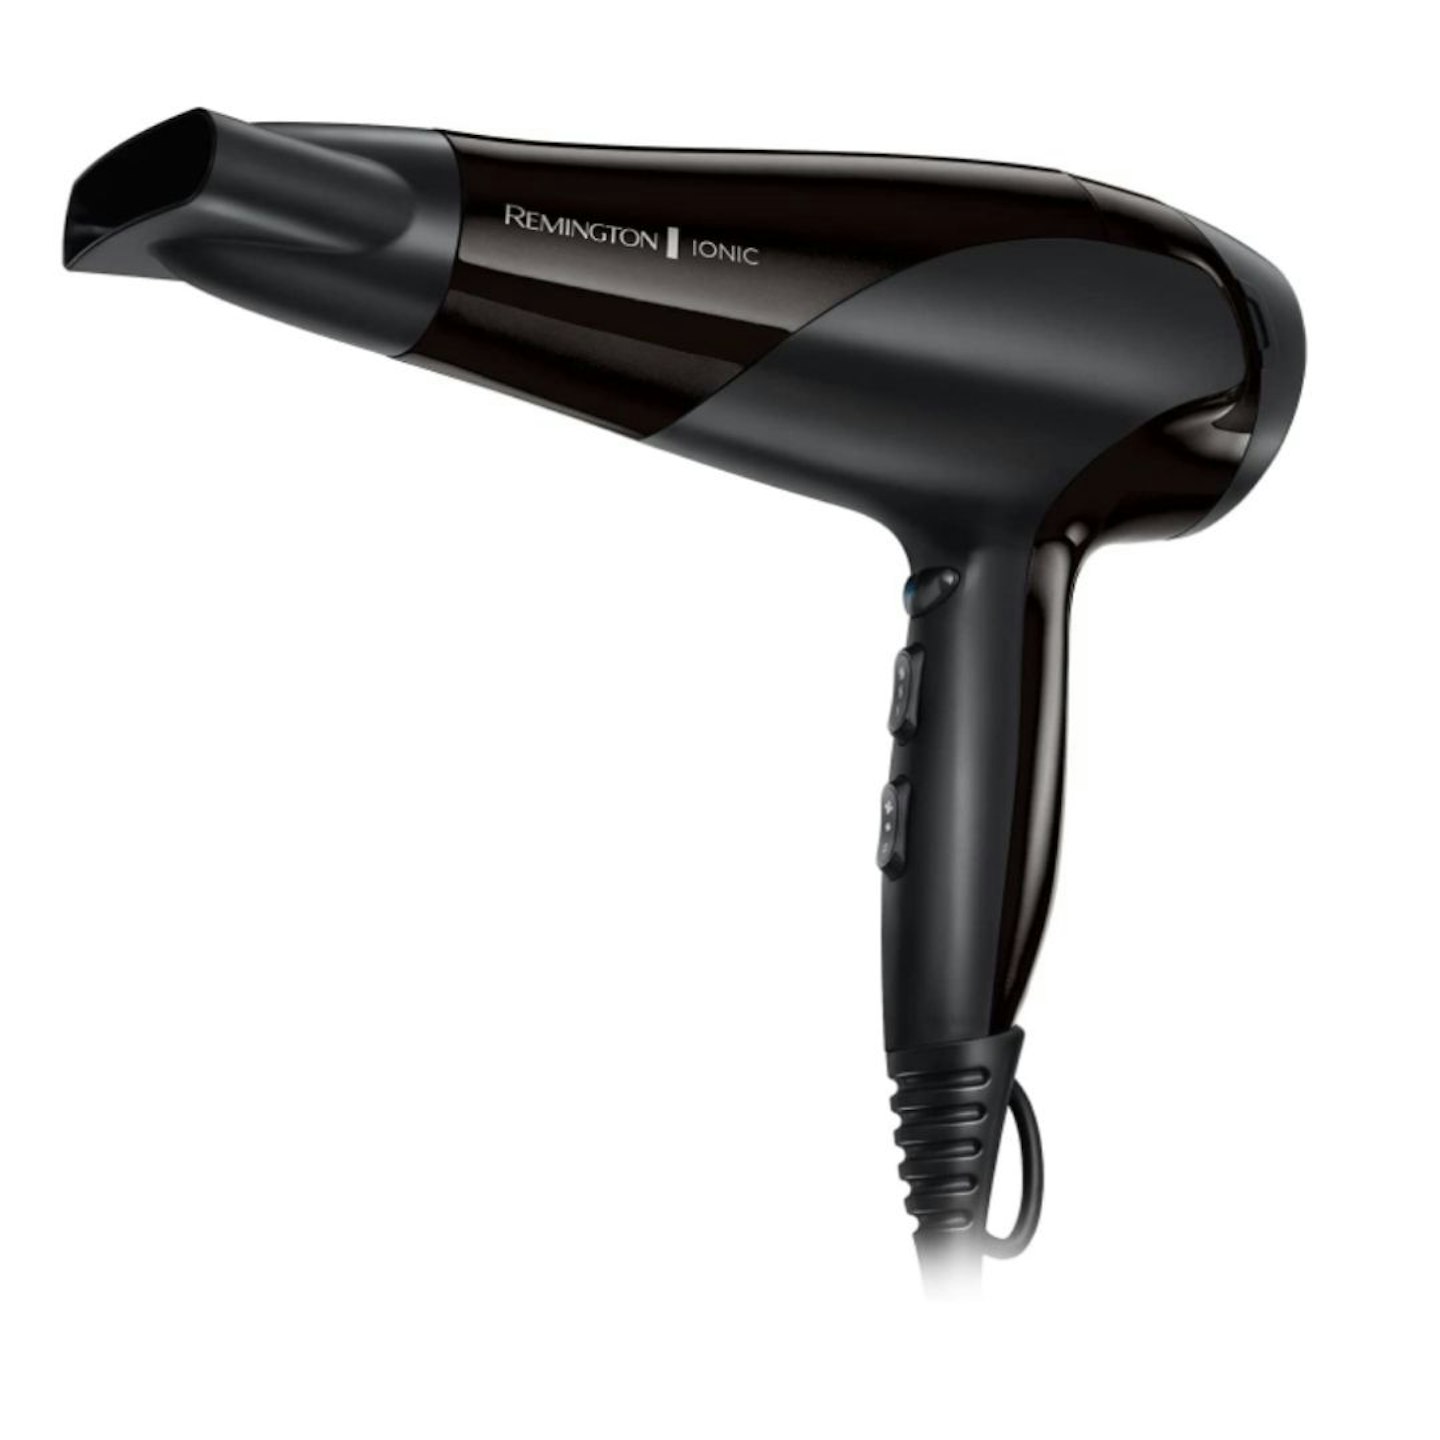 Remington D3198 Ionic Conditioning Hair Dryer for Frizz Free Styling with Diffuser and Concentrator Attachments, 2200 W - Black